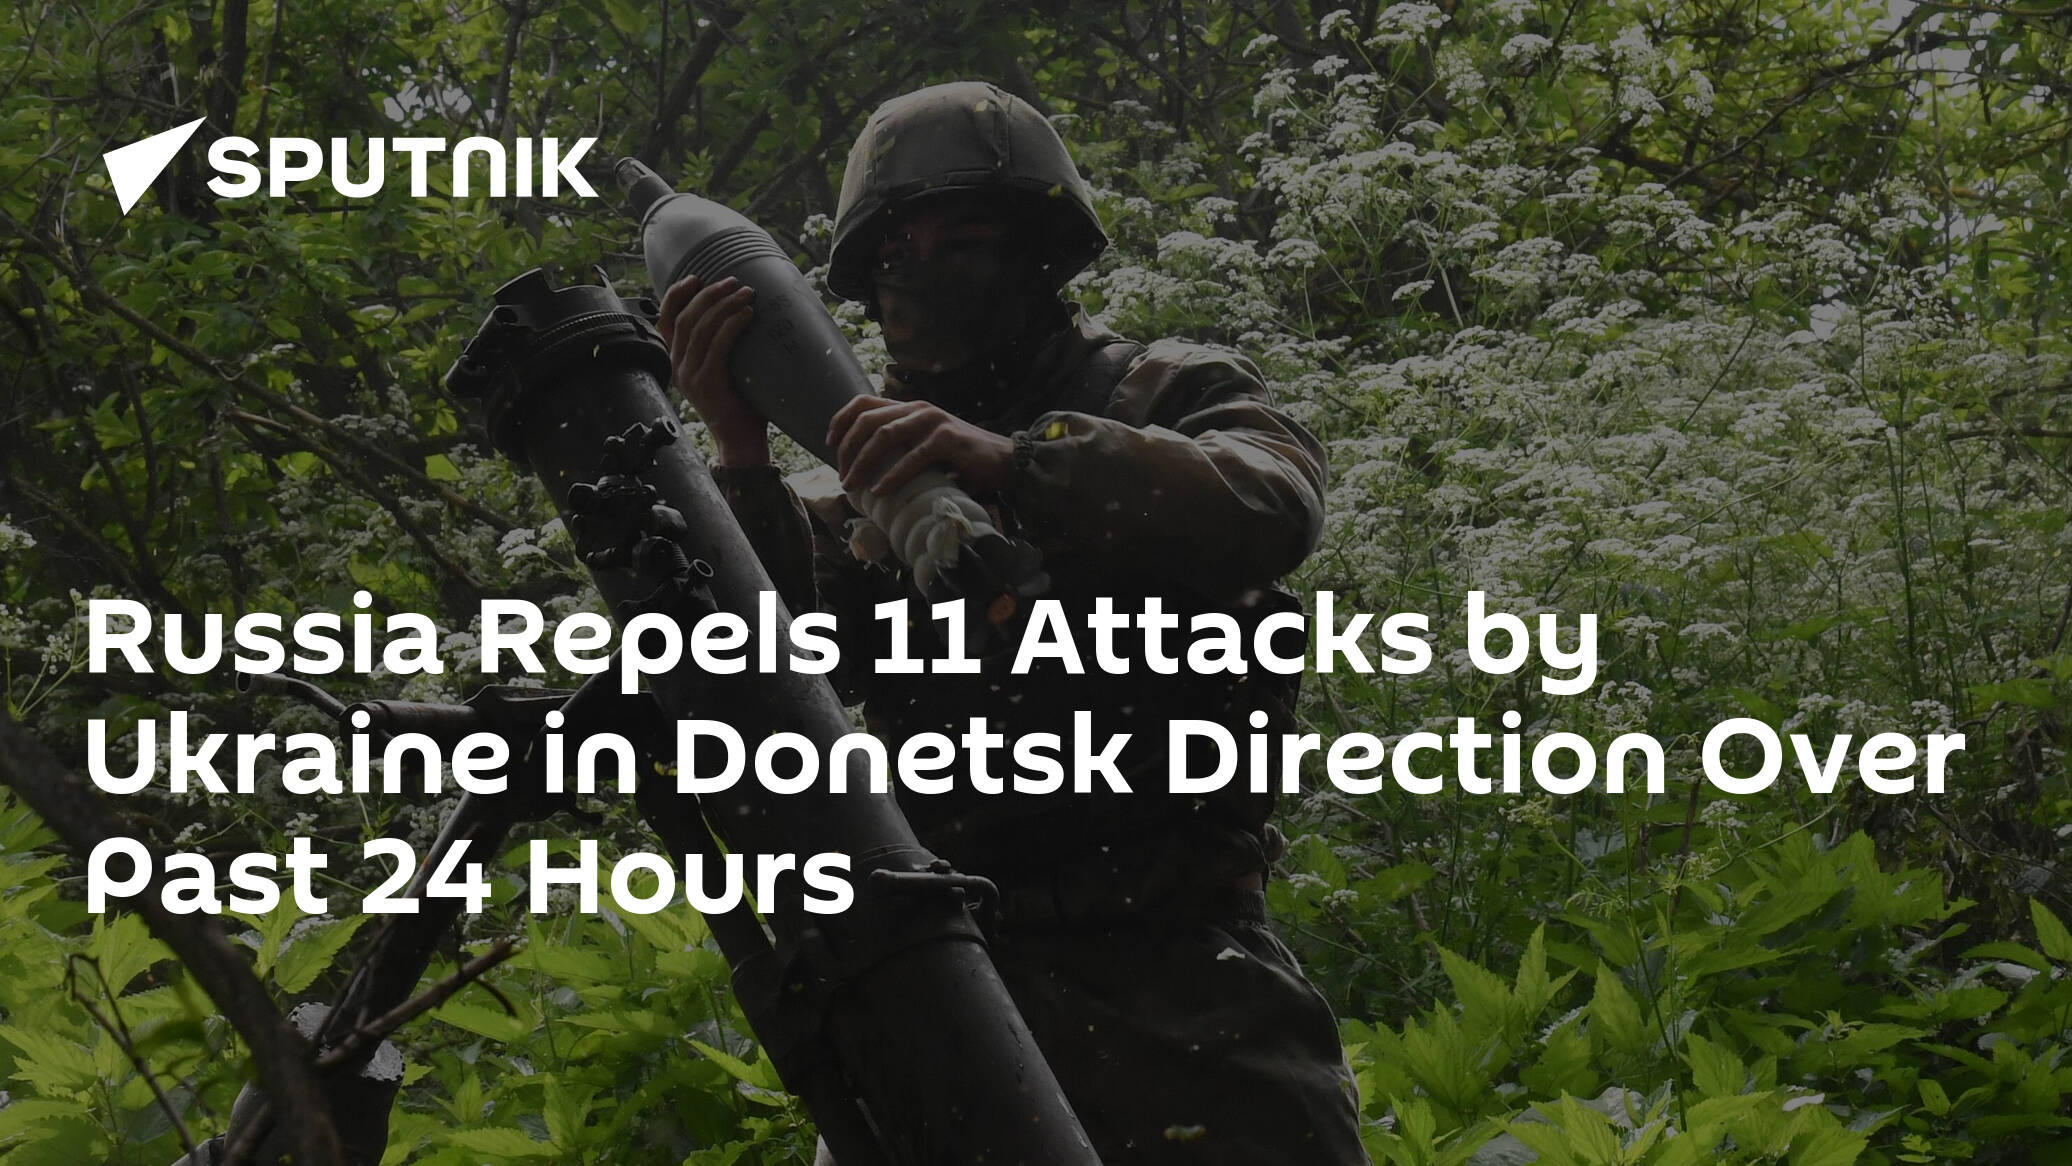 Russia Repels 11 Attacks by Ukraine in Donetsk Direction Over Past 24 Hours